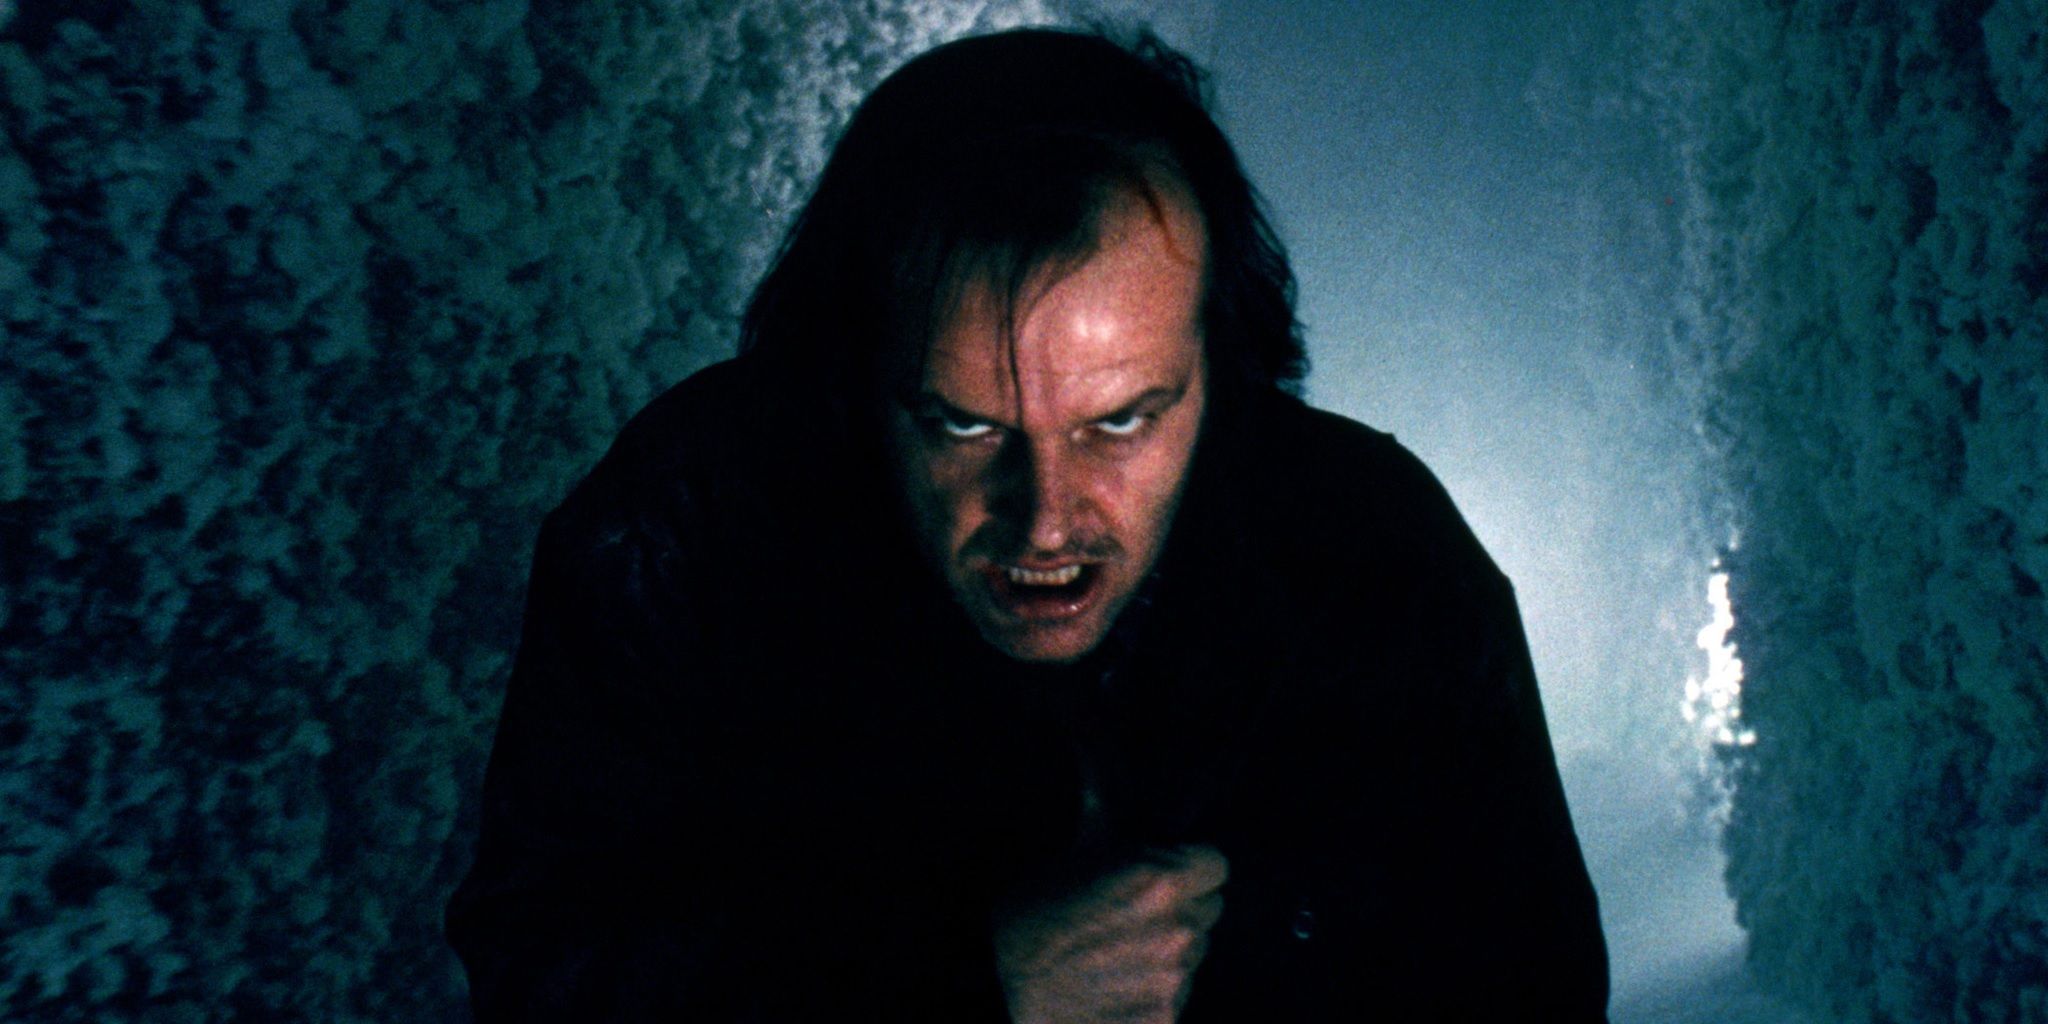 Jack Nicholson as Jack Torrance in the hedge maze in The Shining